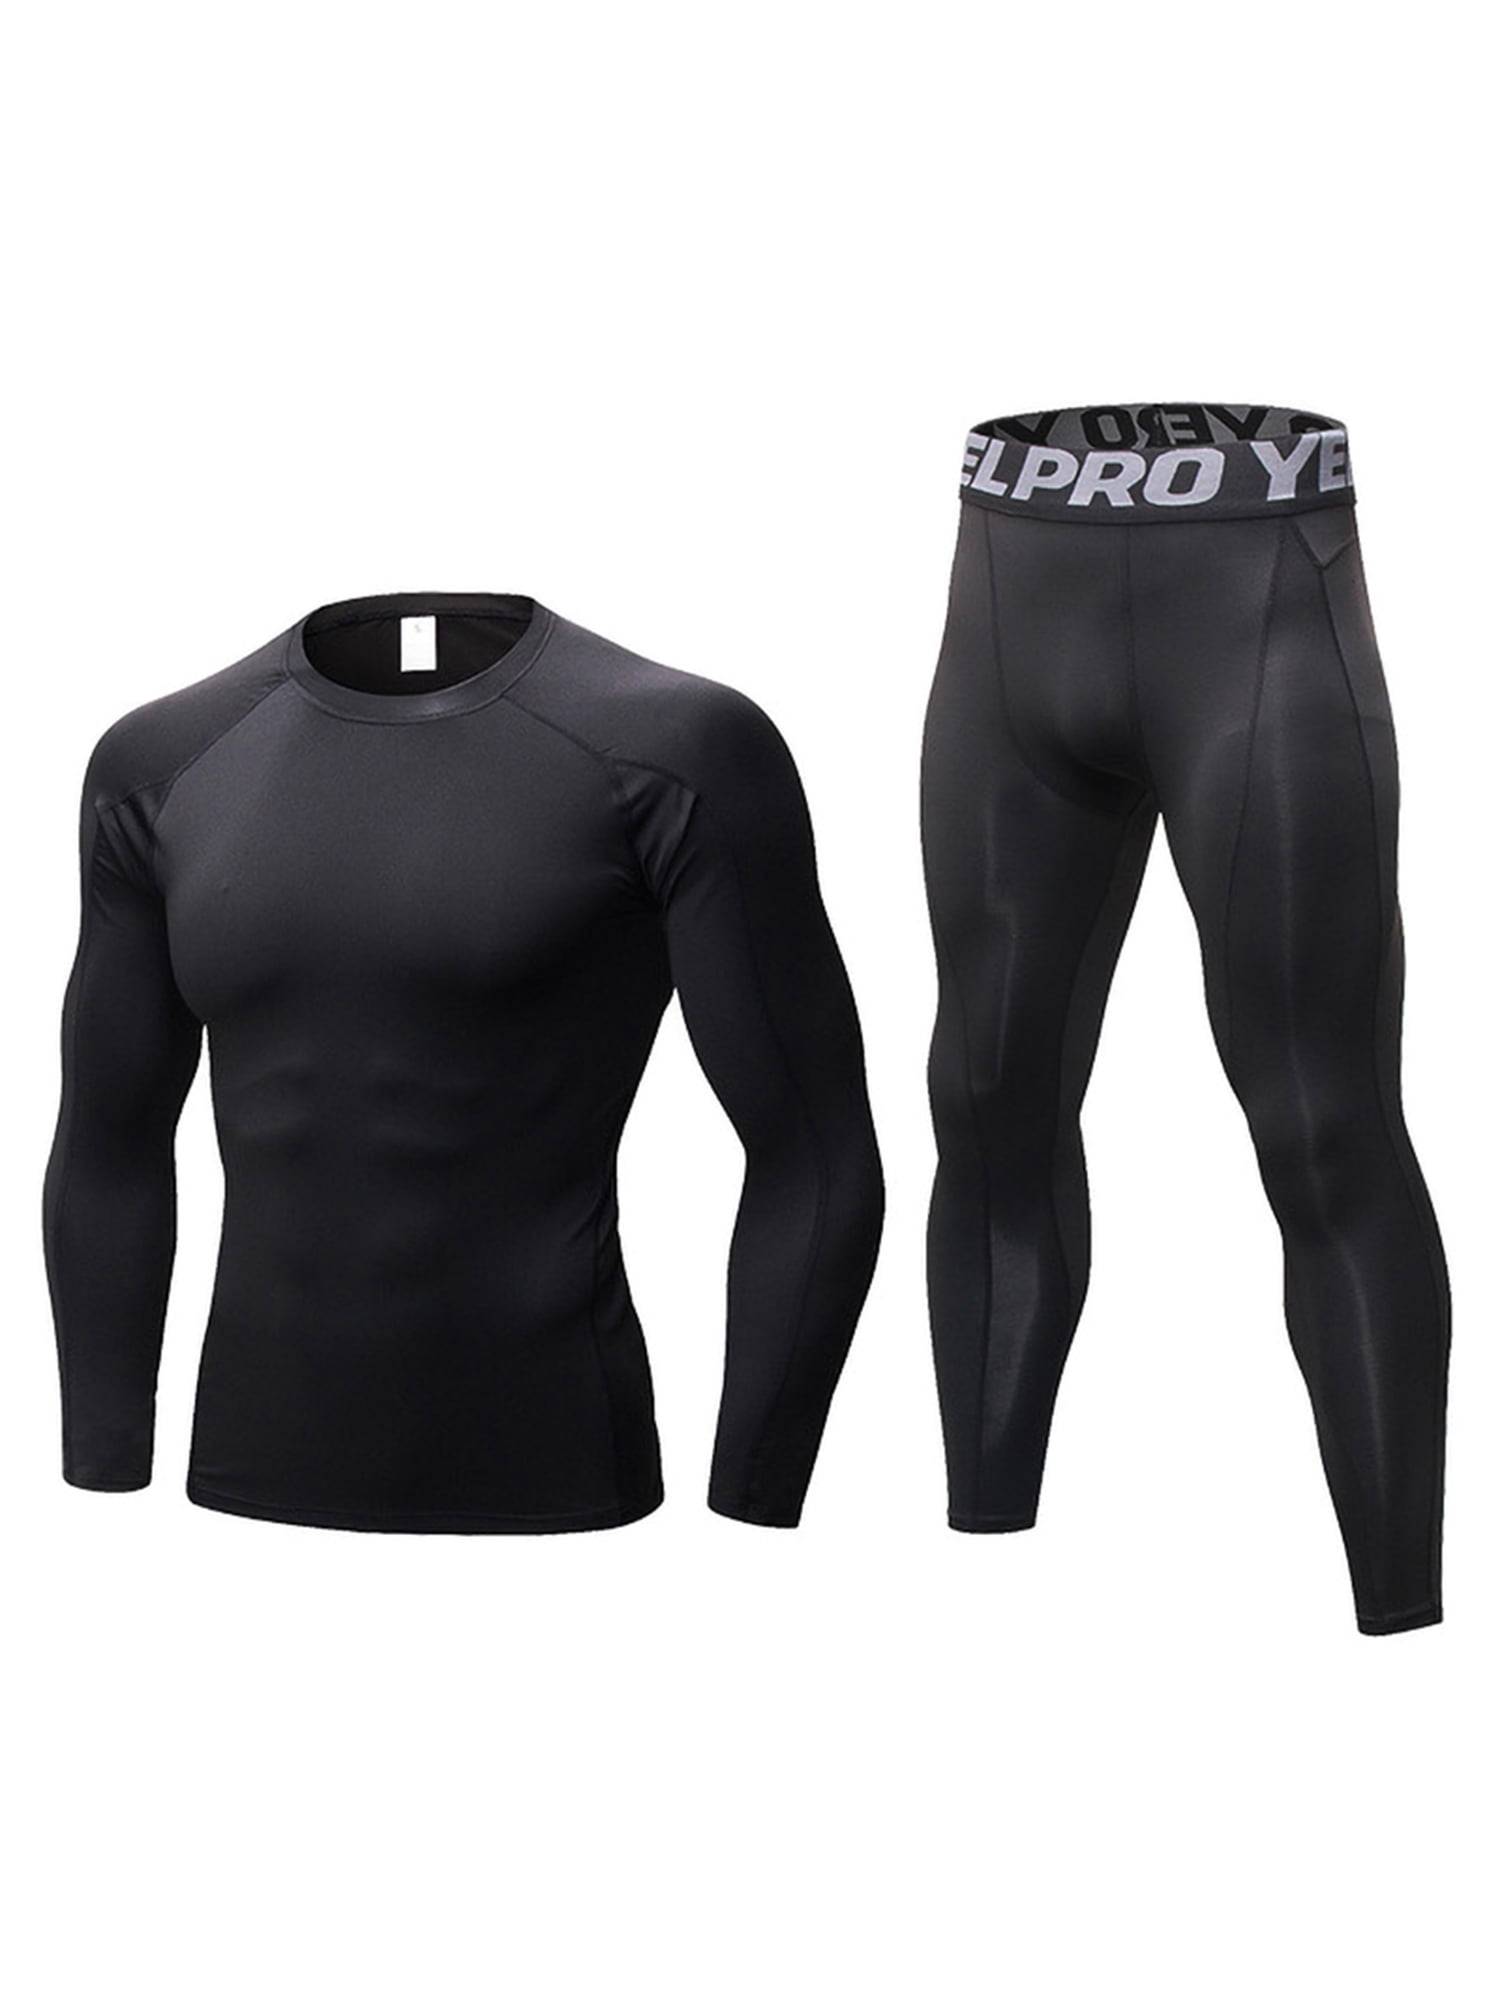 Mens Compression Base Layer Sport T-Shirt Gym Runing Workout Long Leggings Pants